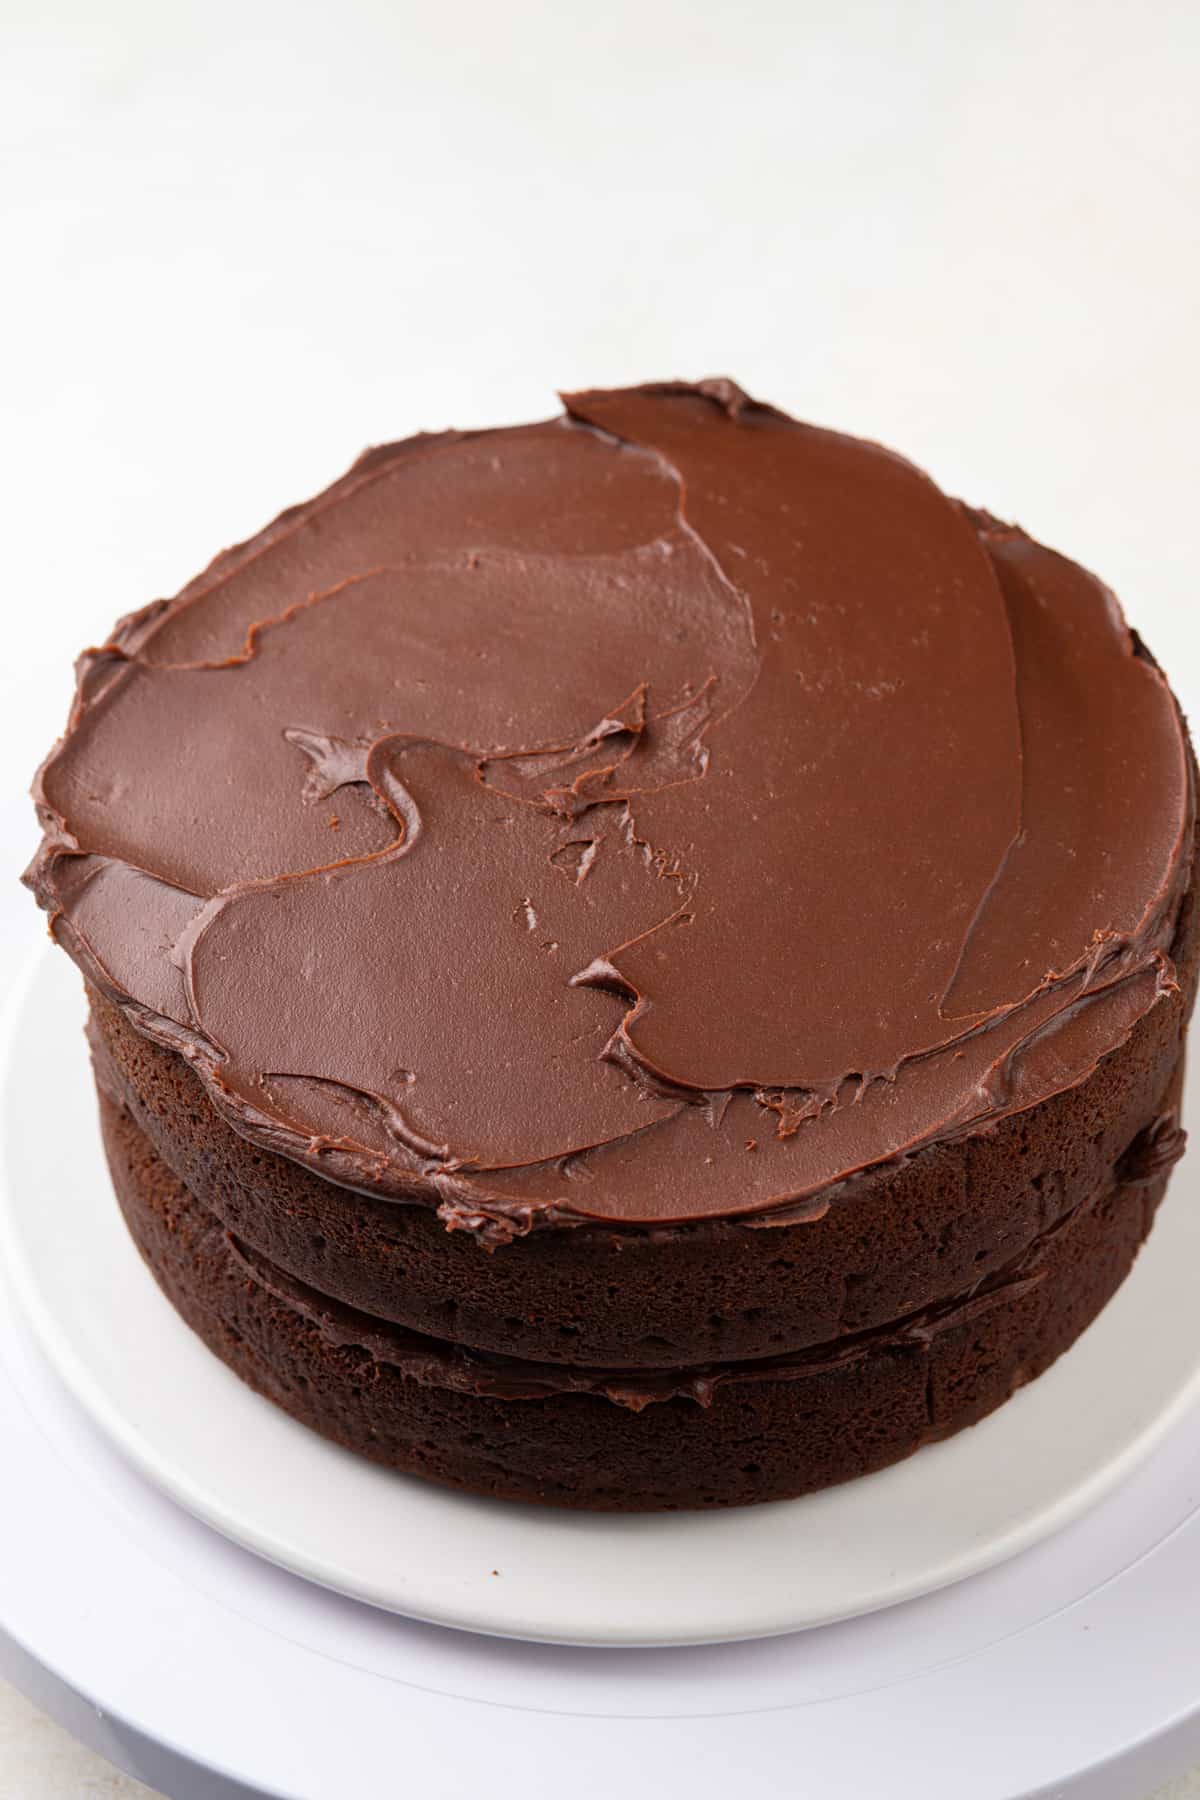 two layers of chocolate guinness cake stacked on a cake plate and topped with chocolate ganache frosting.